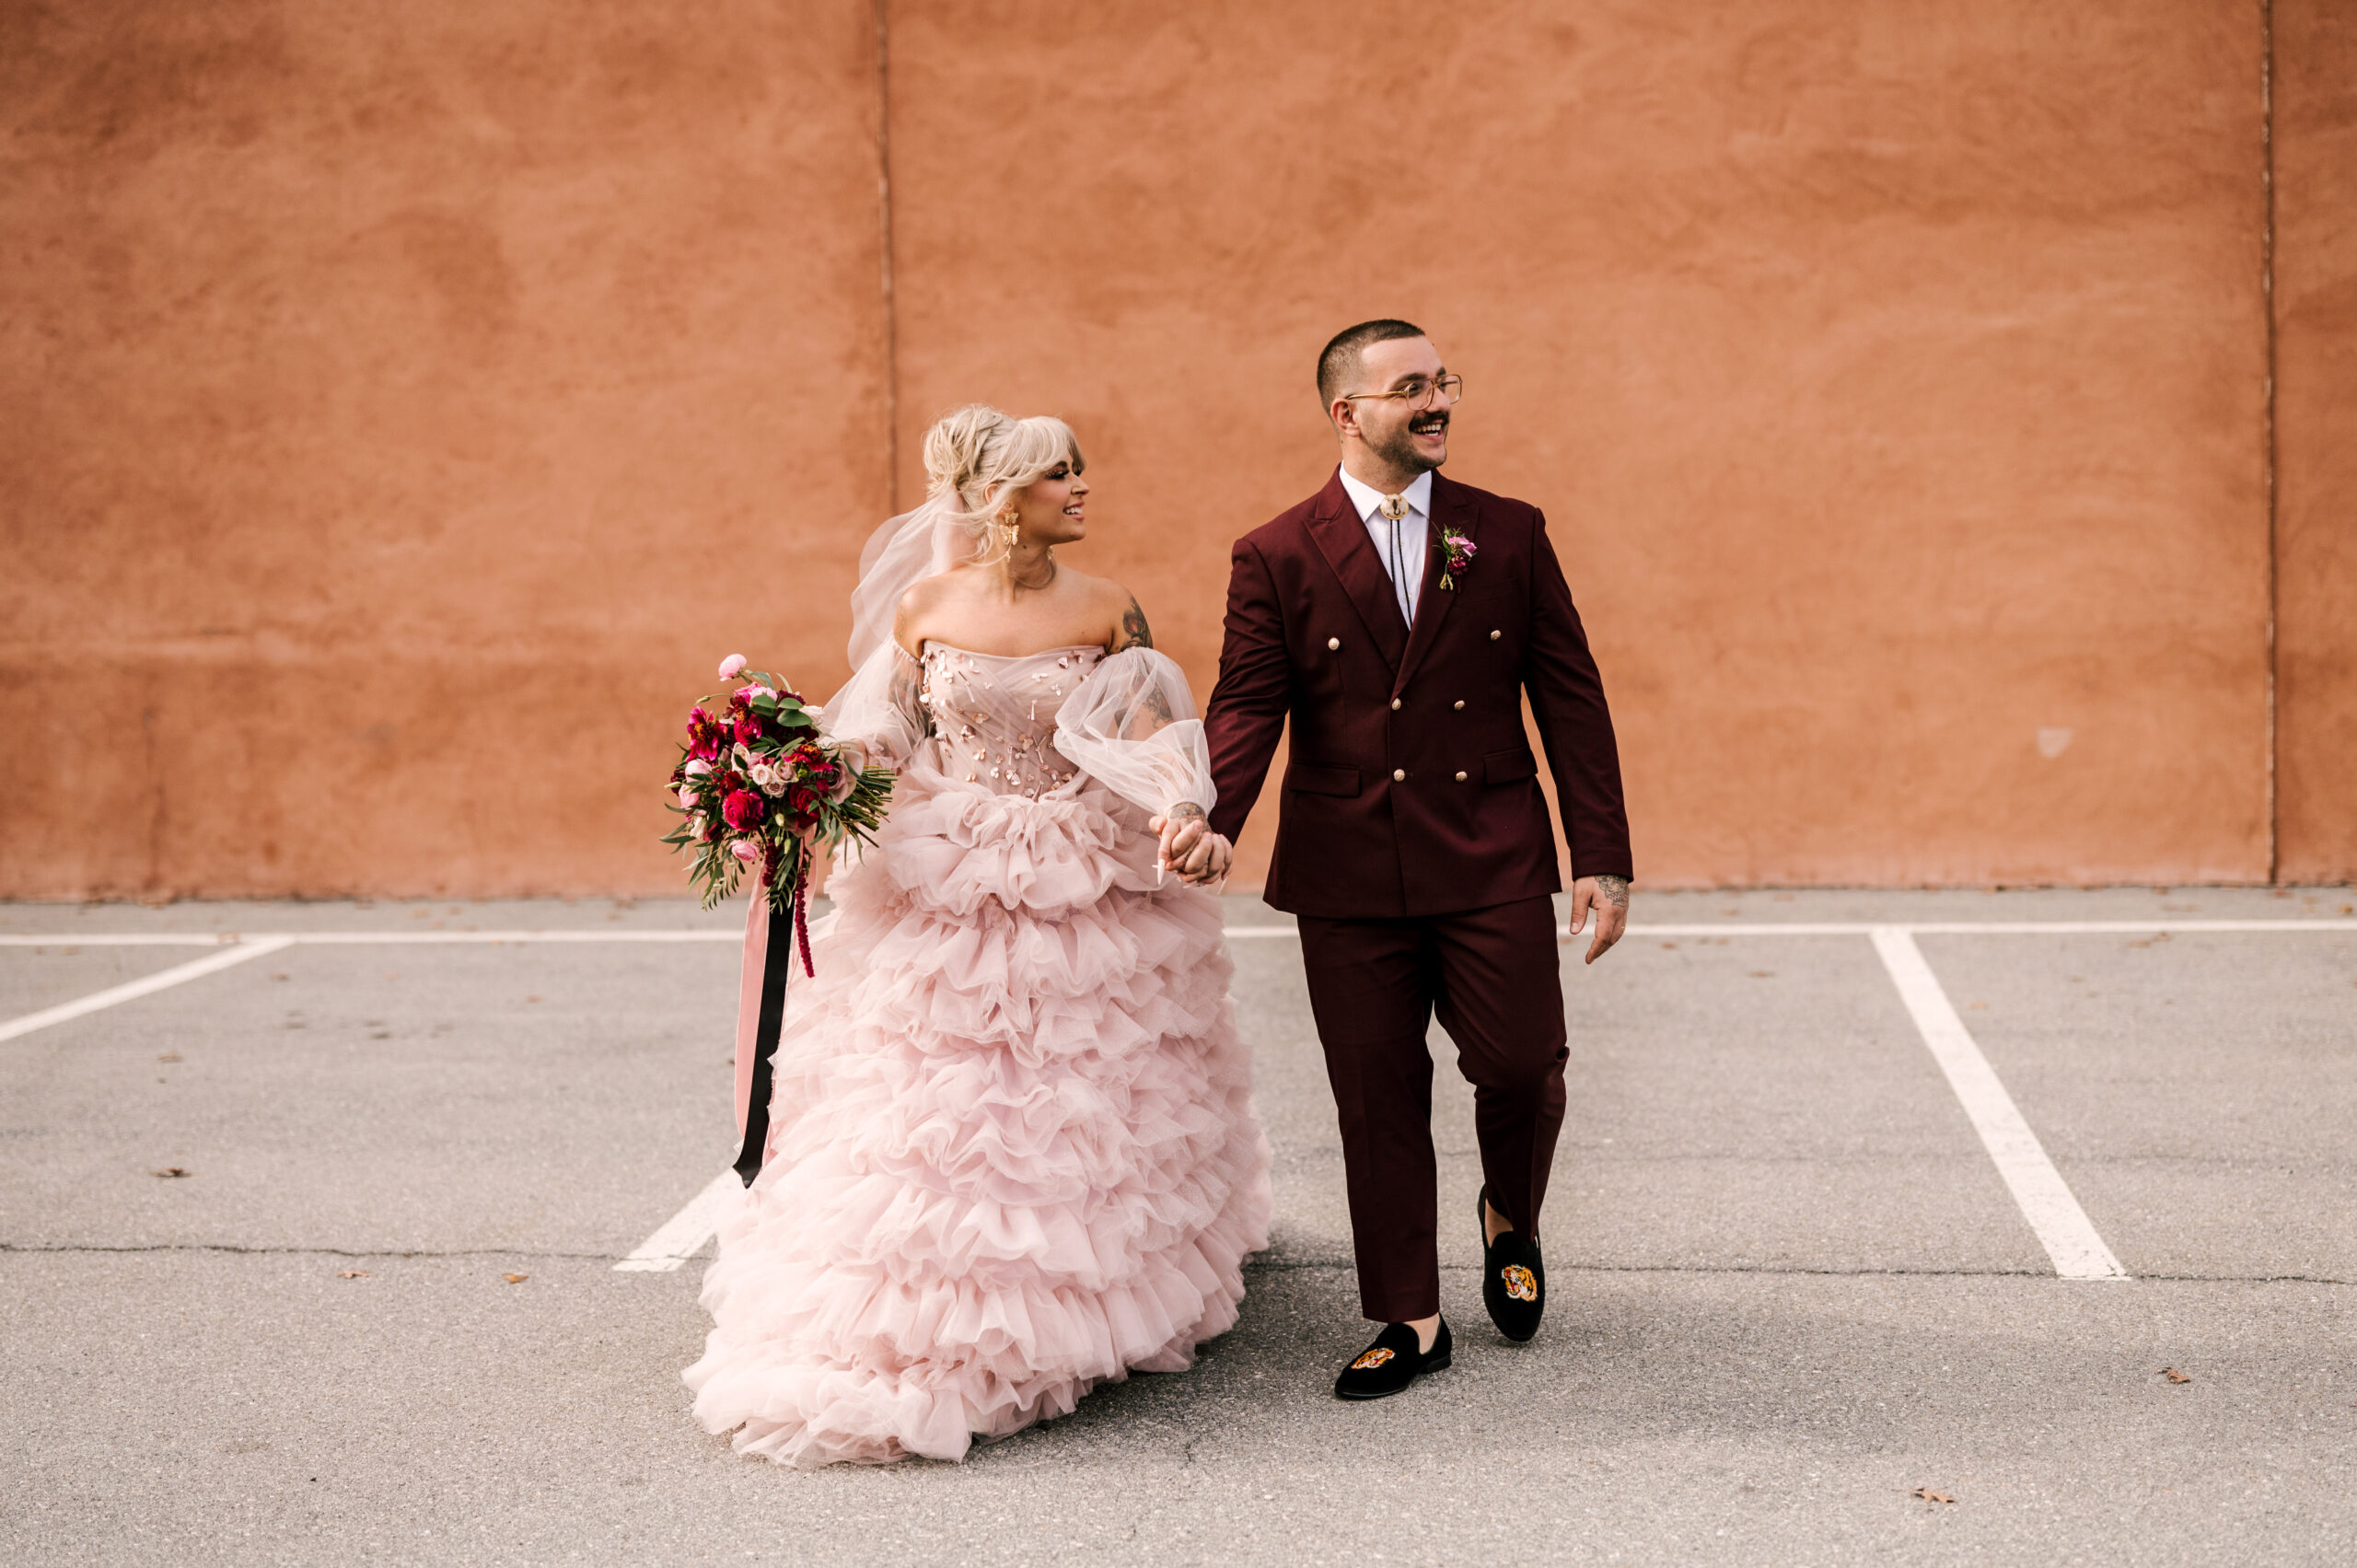 Alternative punk Bride and Groom walking together at their Cork Factory Hotel wedding in Lancaster Pennsylvania. Bride is in a pink punk rock barbie doll style dress with vibrant flowers. Groom is in burgundy suit. Industrial October wedding